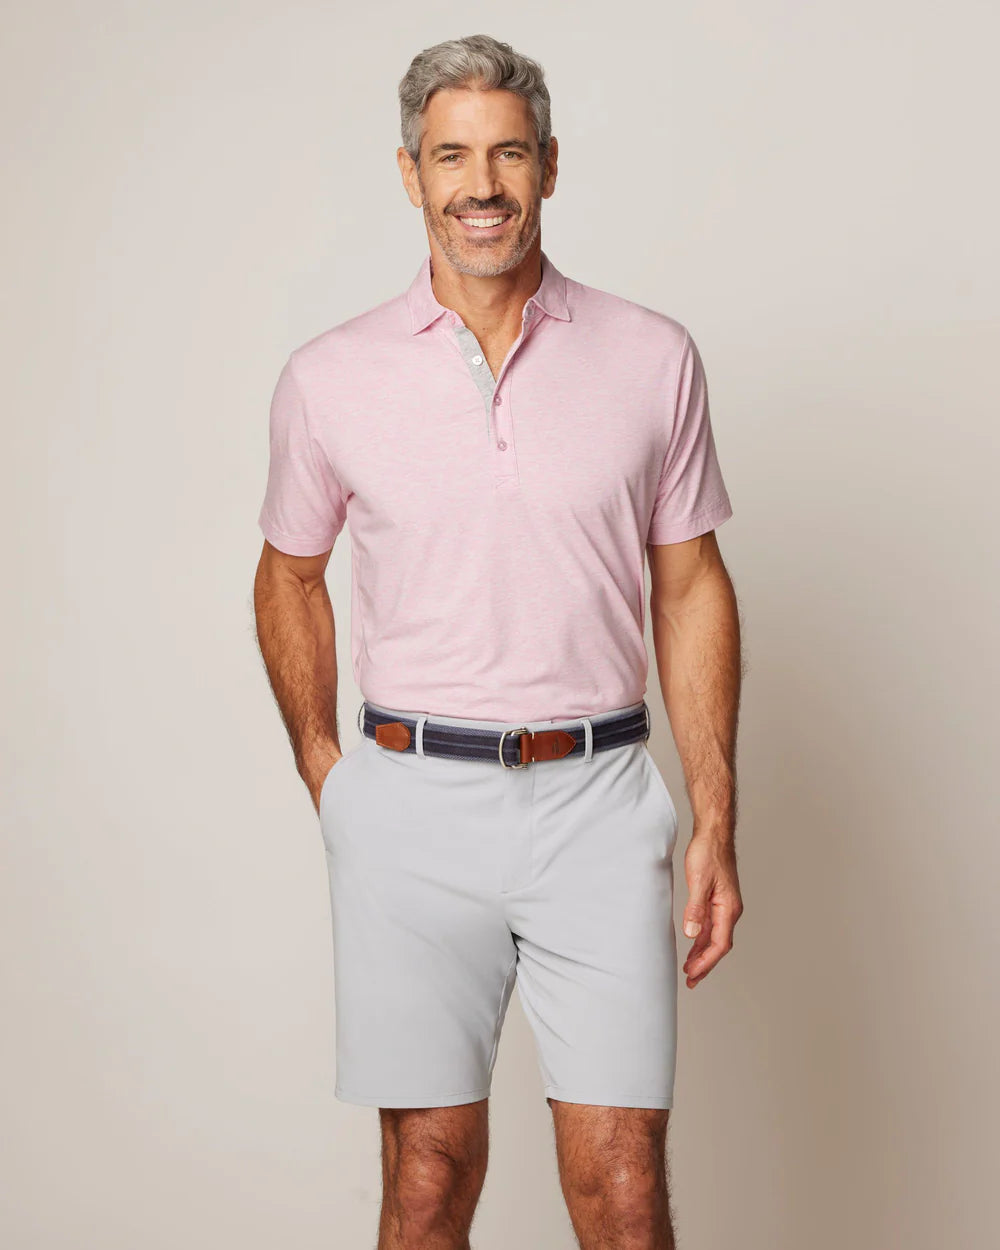 Johnnie-O Linxter Cotton Blend Performance Polo In Bahama Mama